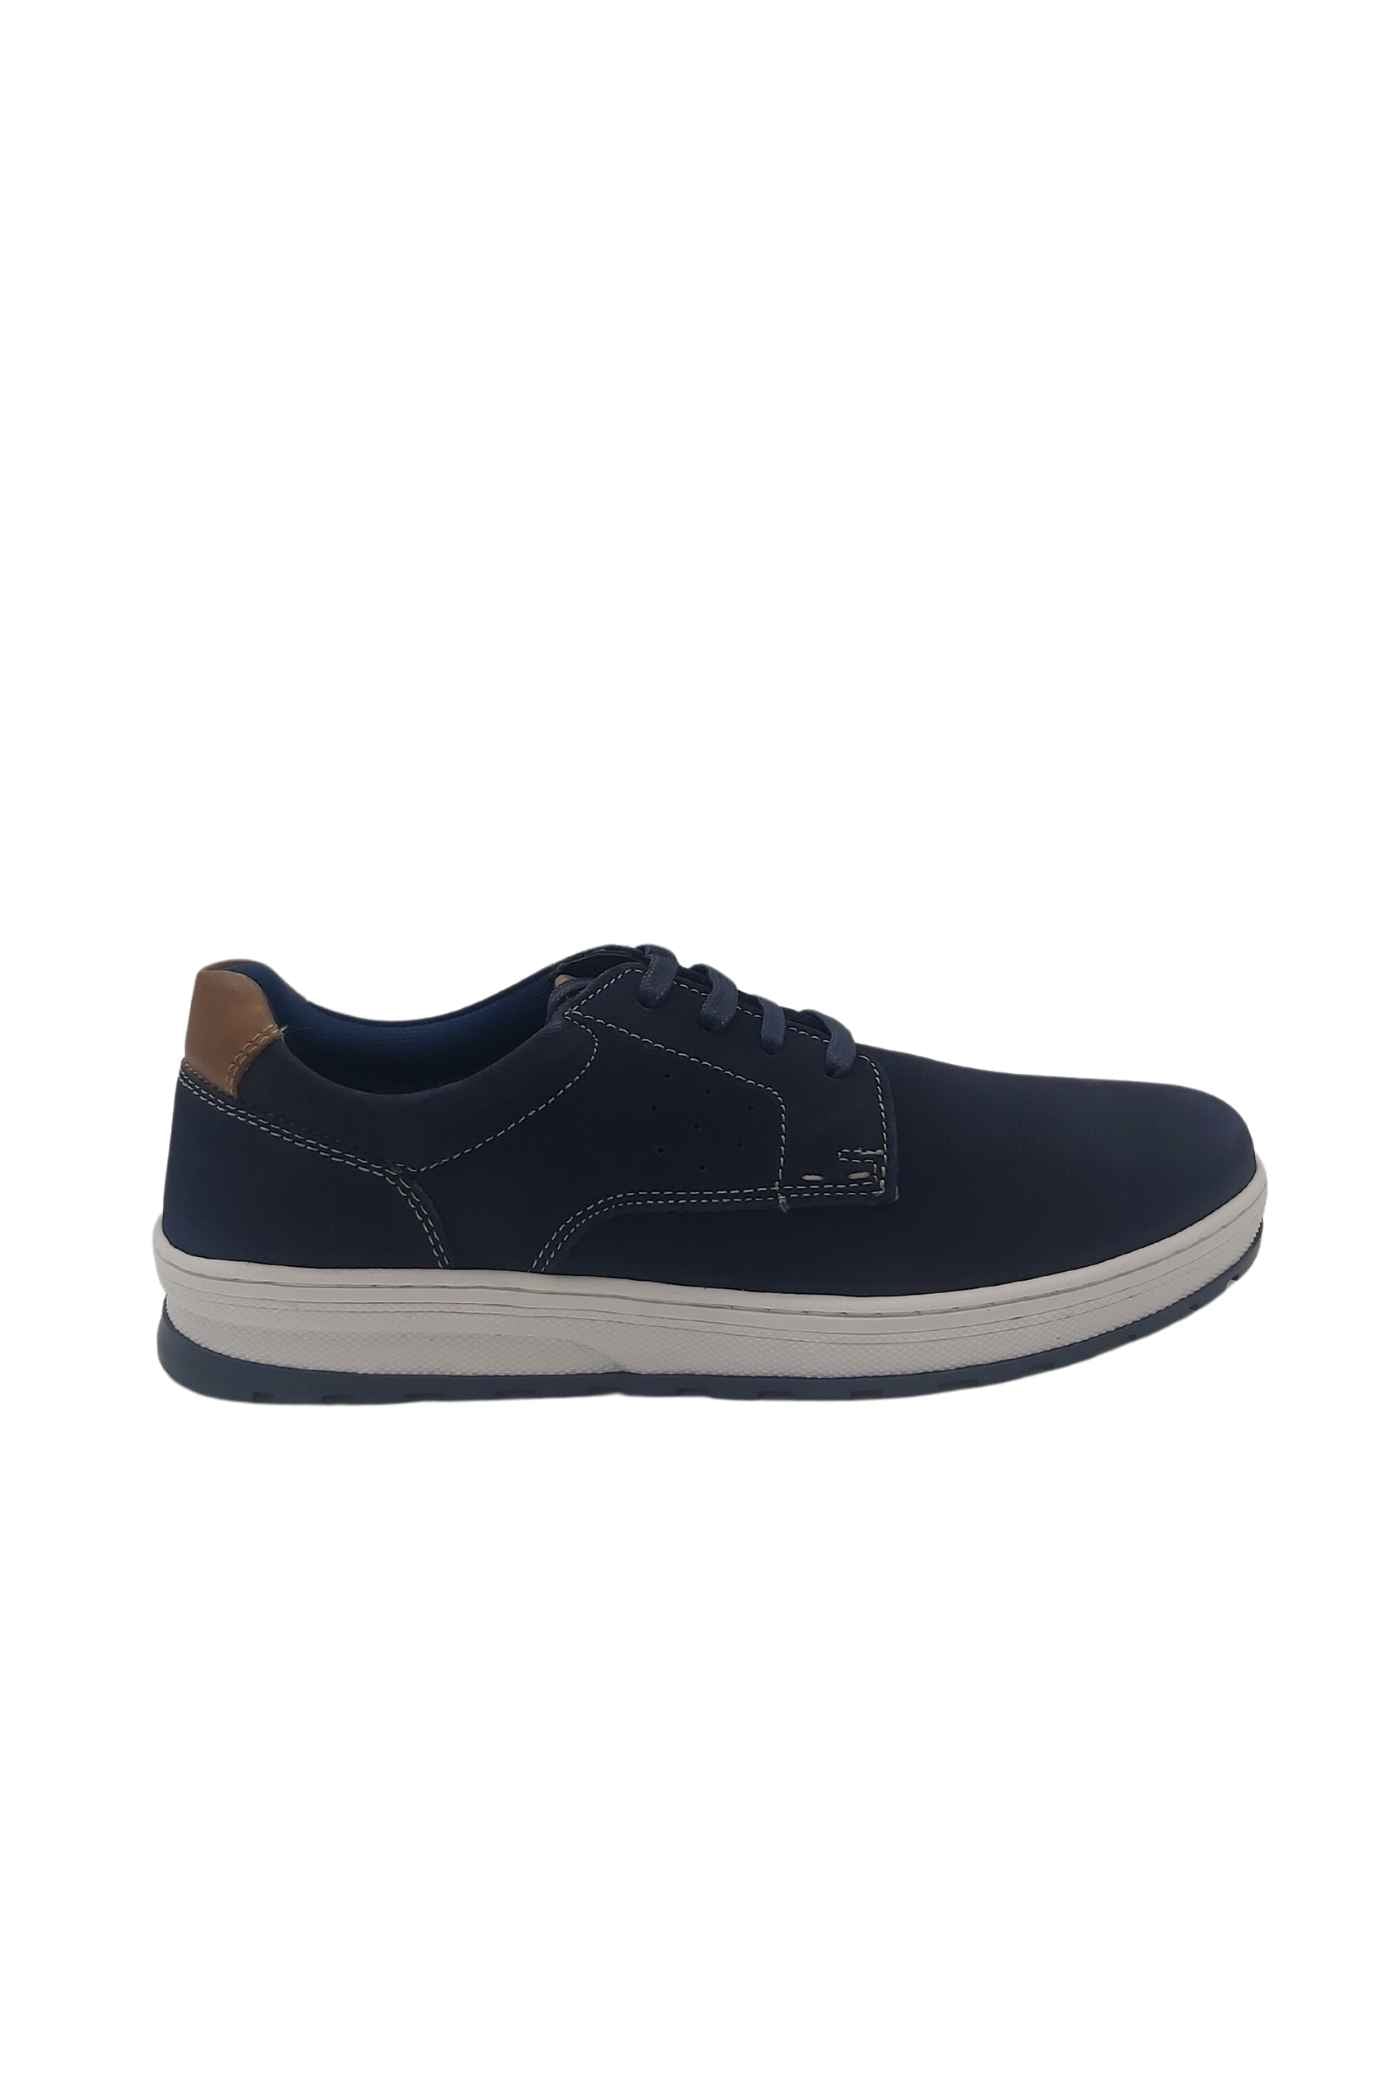 Men's Daly Navy Smart Casual Shoe-Side View